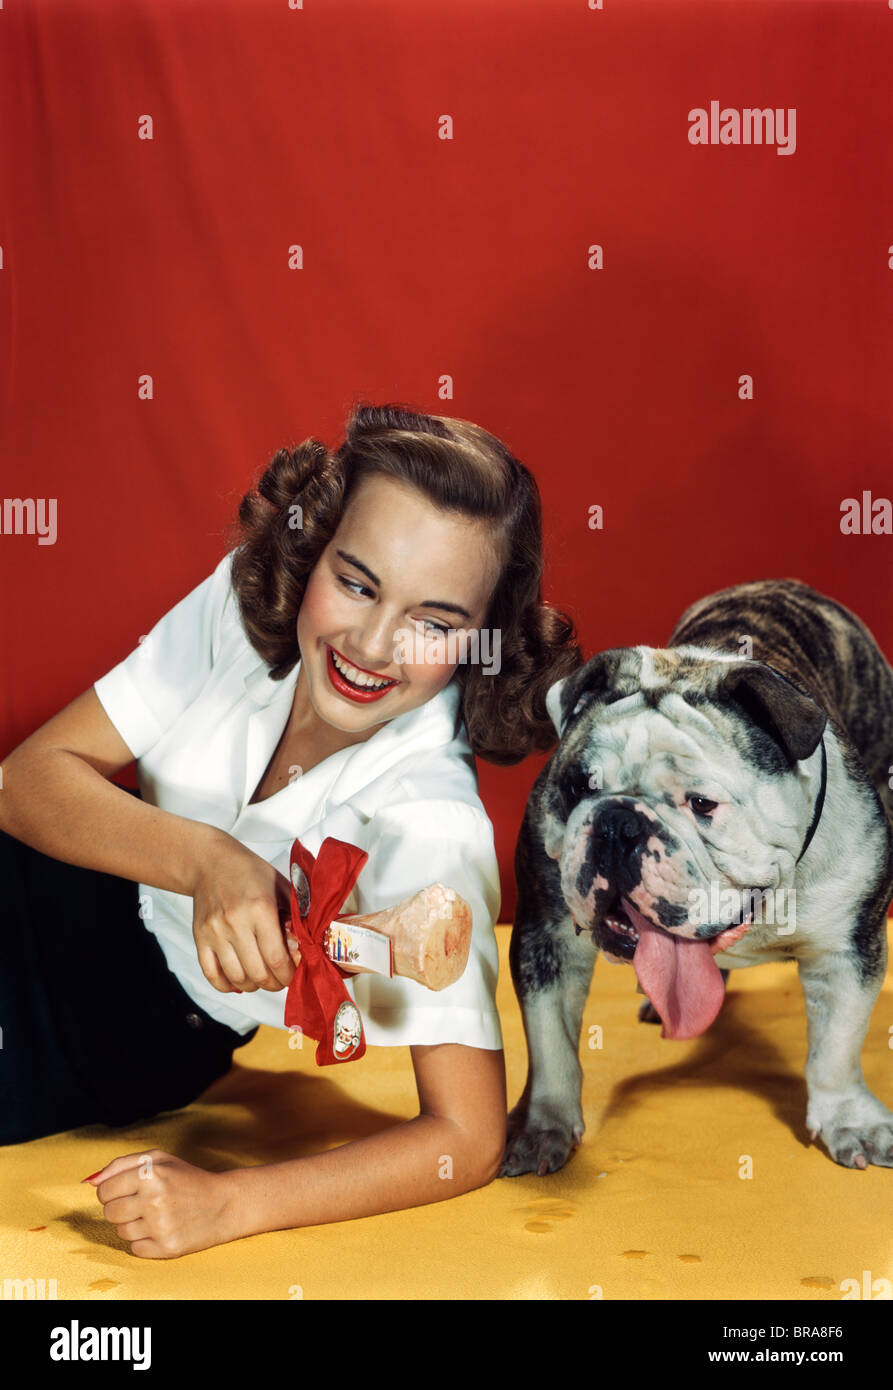 1940s 1950s YOUNG WOMAN GIVING BULLDOG A PRESENT OF A BONE WRAPPED IN RED BOW Stock Photo